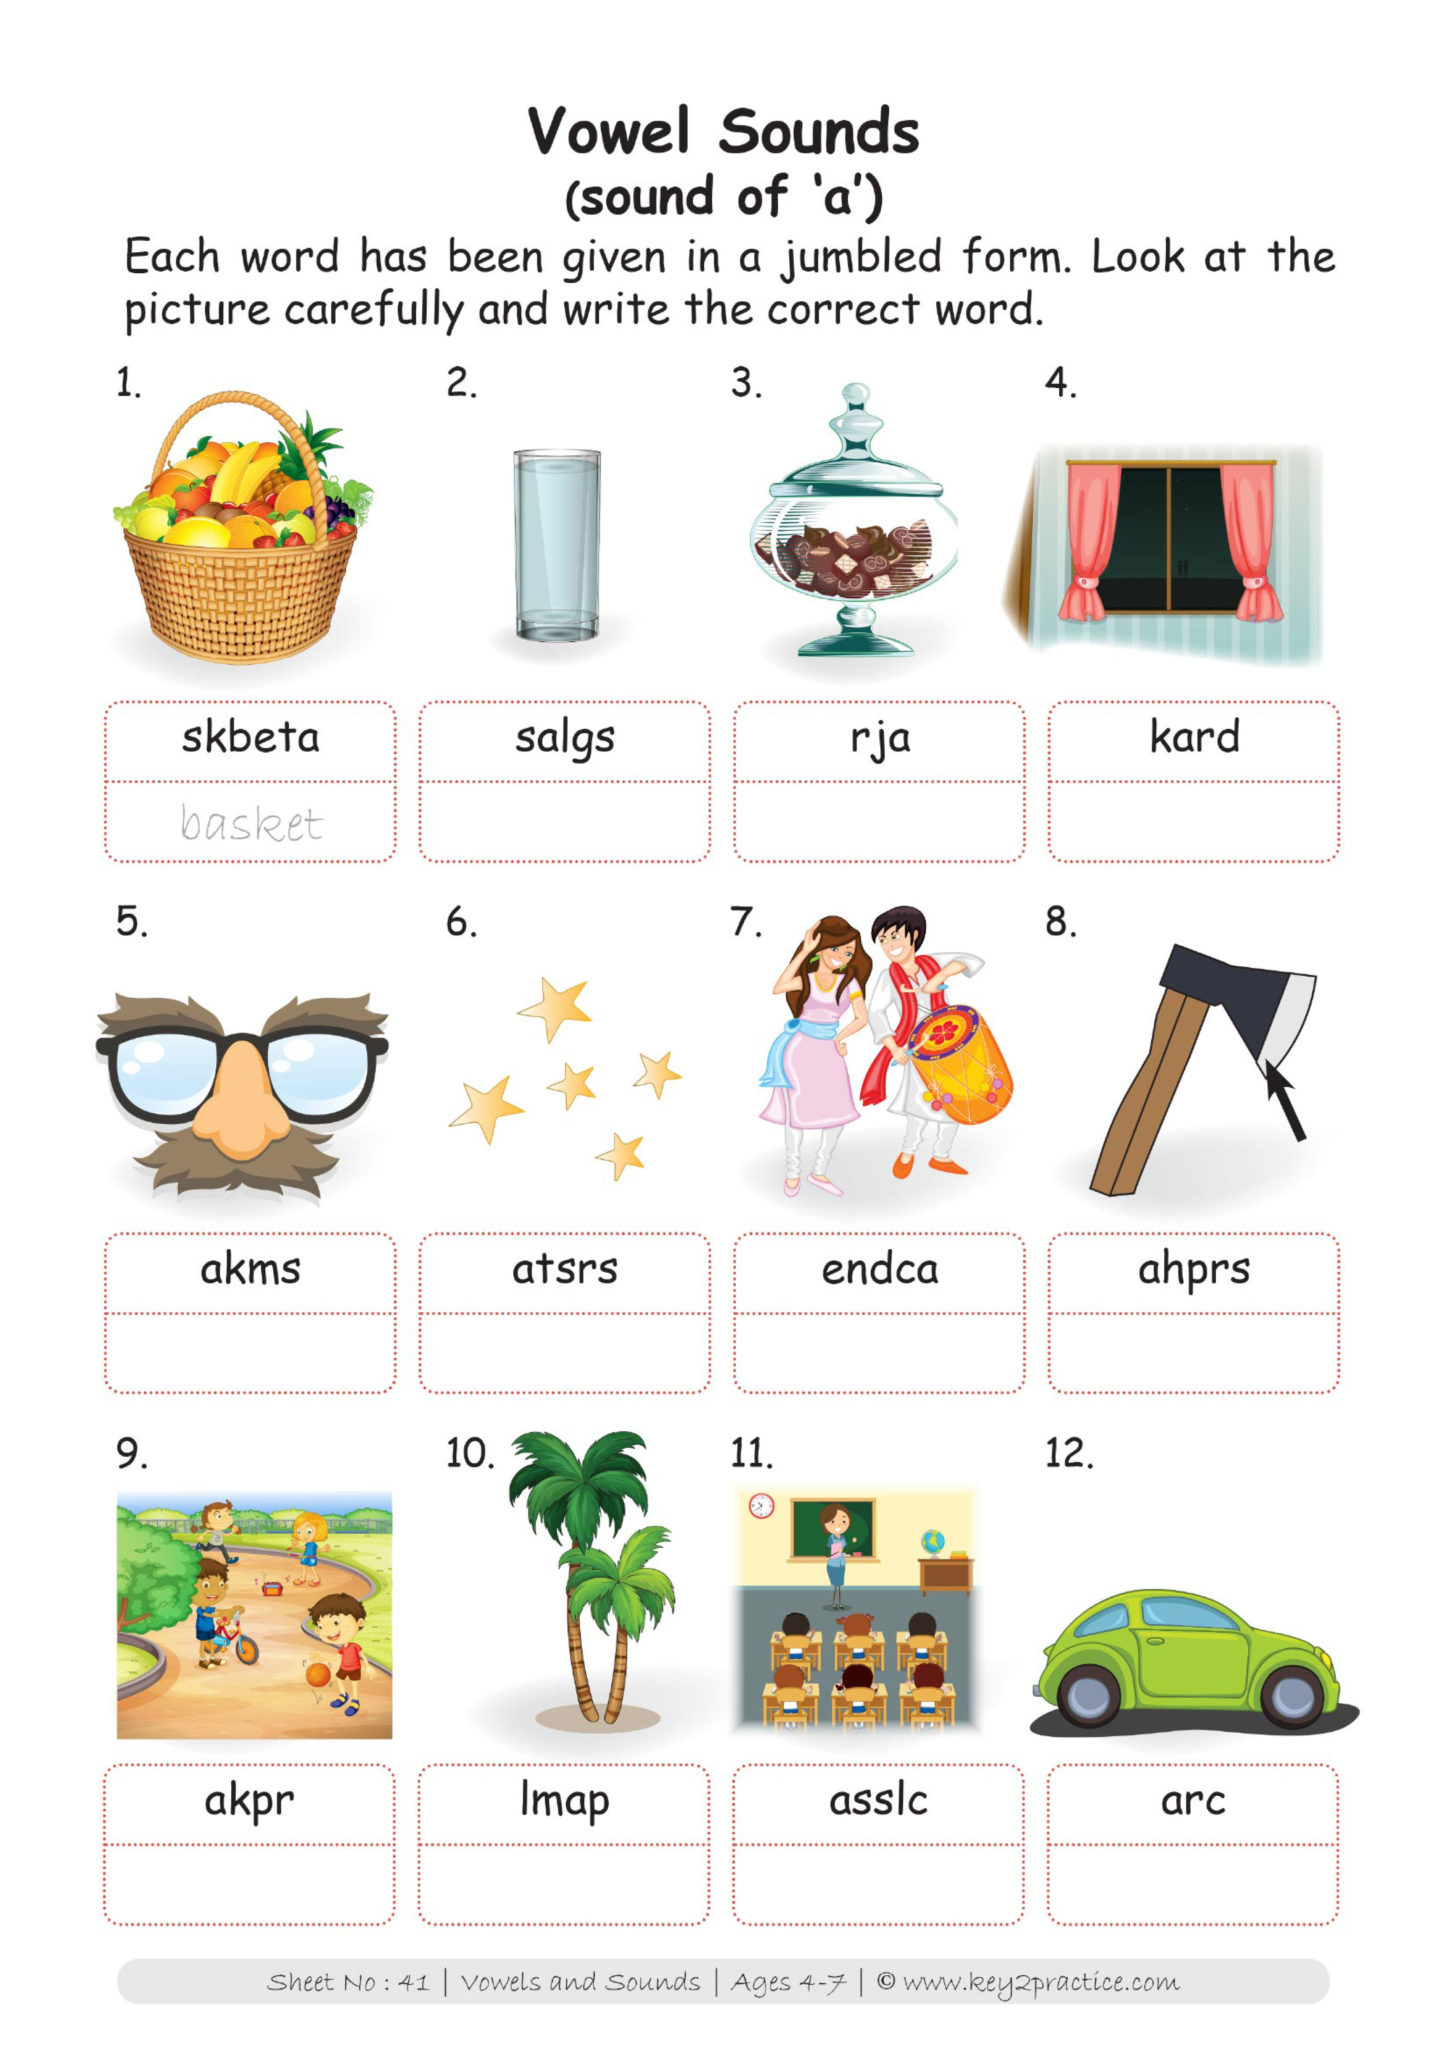 Vowels and Consonants Worksheets I Preprimary classes key2practice